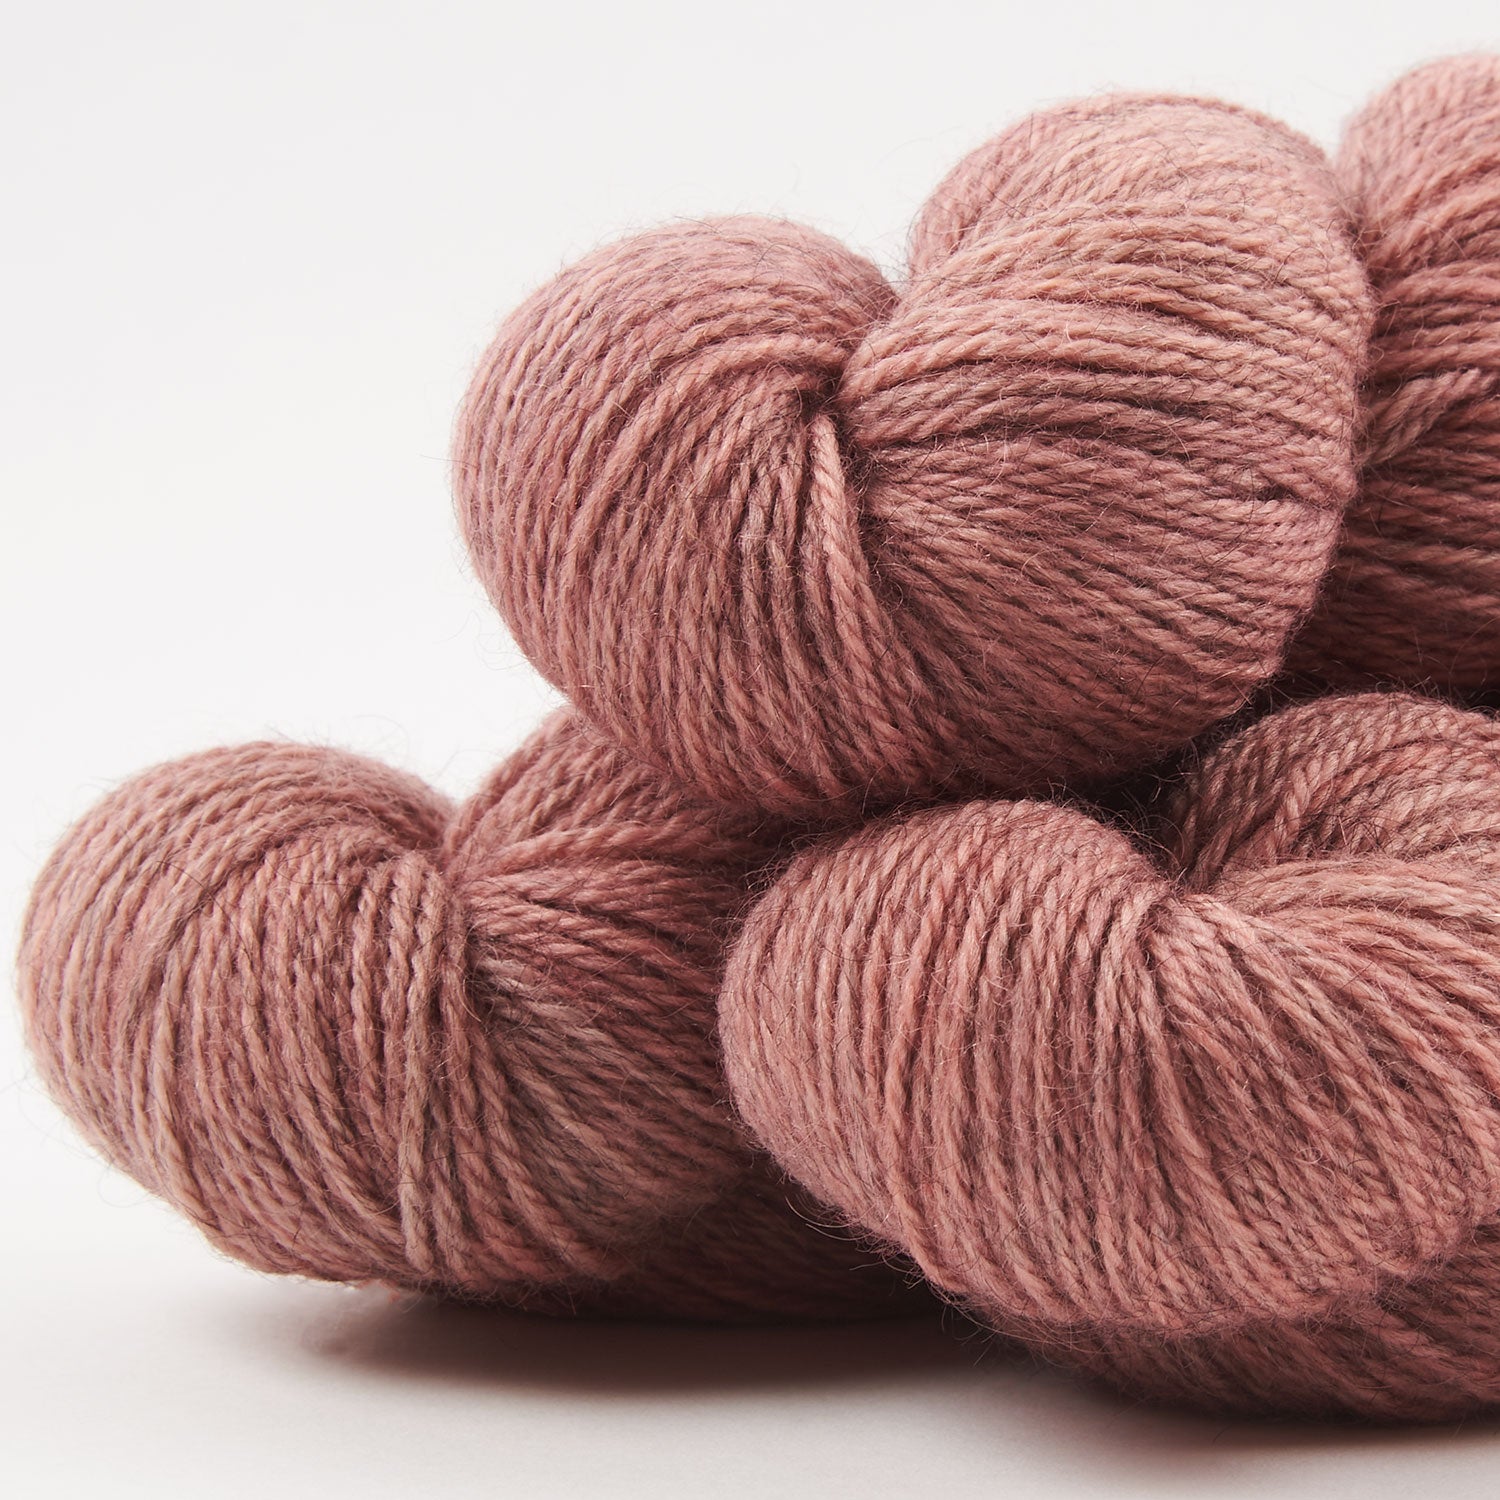 CORRIE WORSTED - DAWN